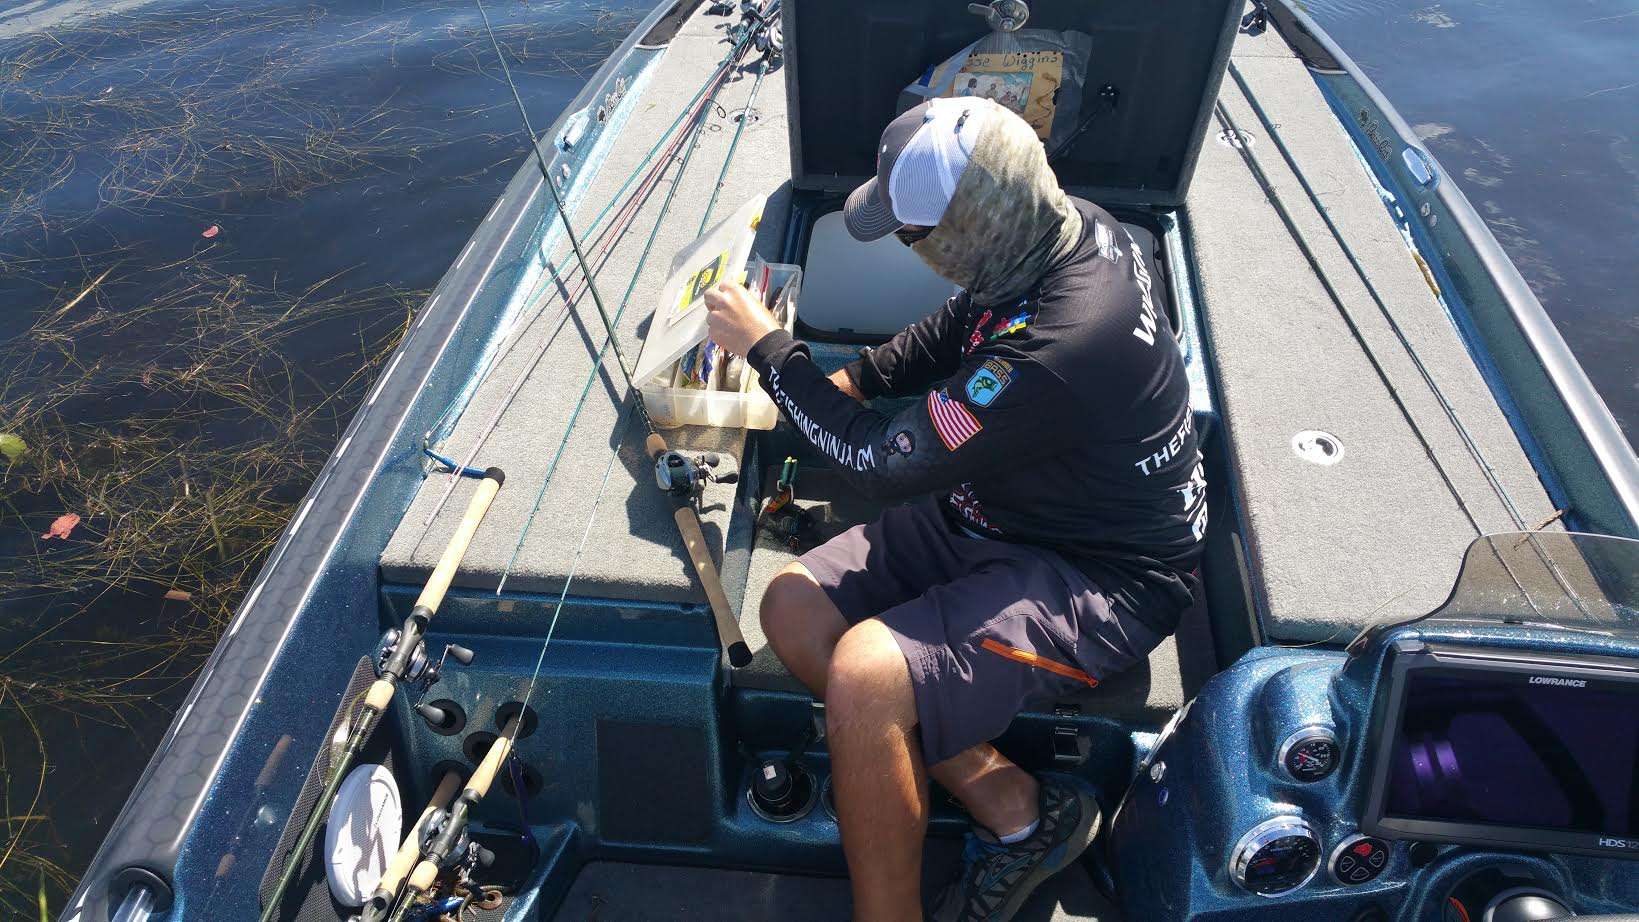 With just 3 1/2 hours fishing time, Wiggins is making a little tackle adjustment in order to get the upgrades he needs.